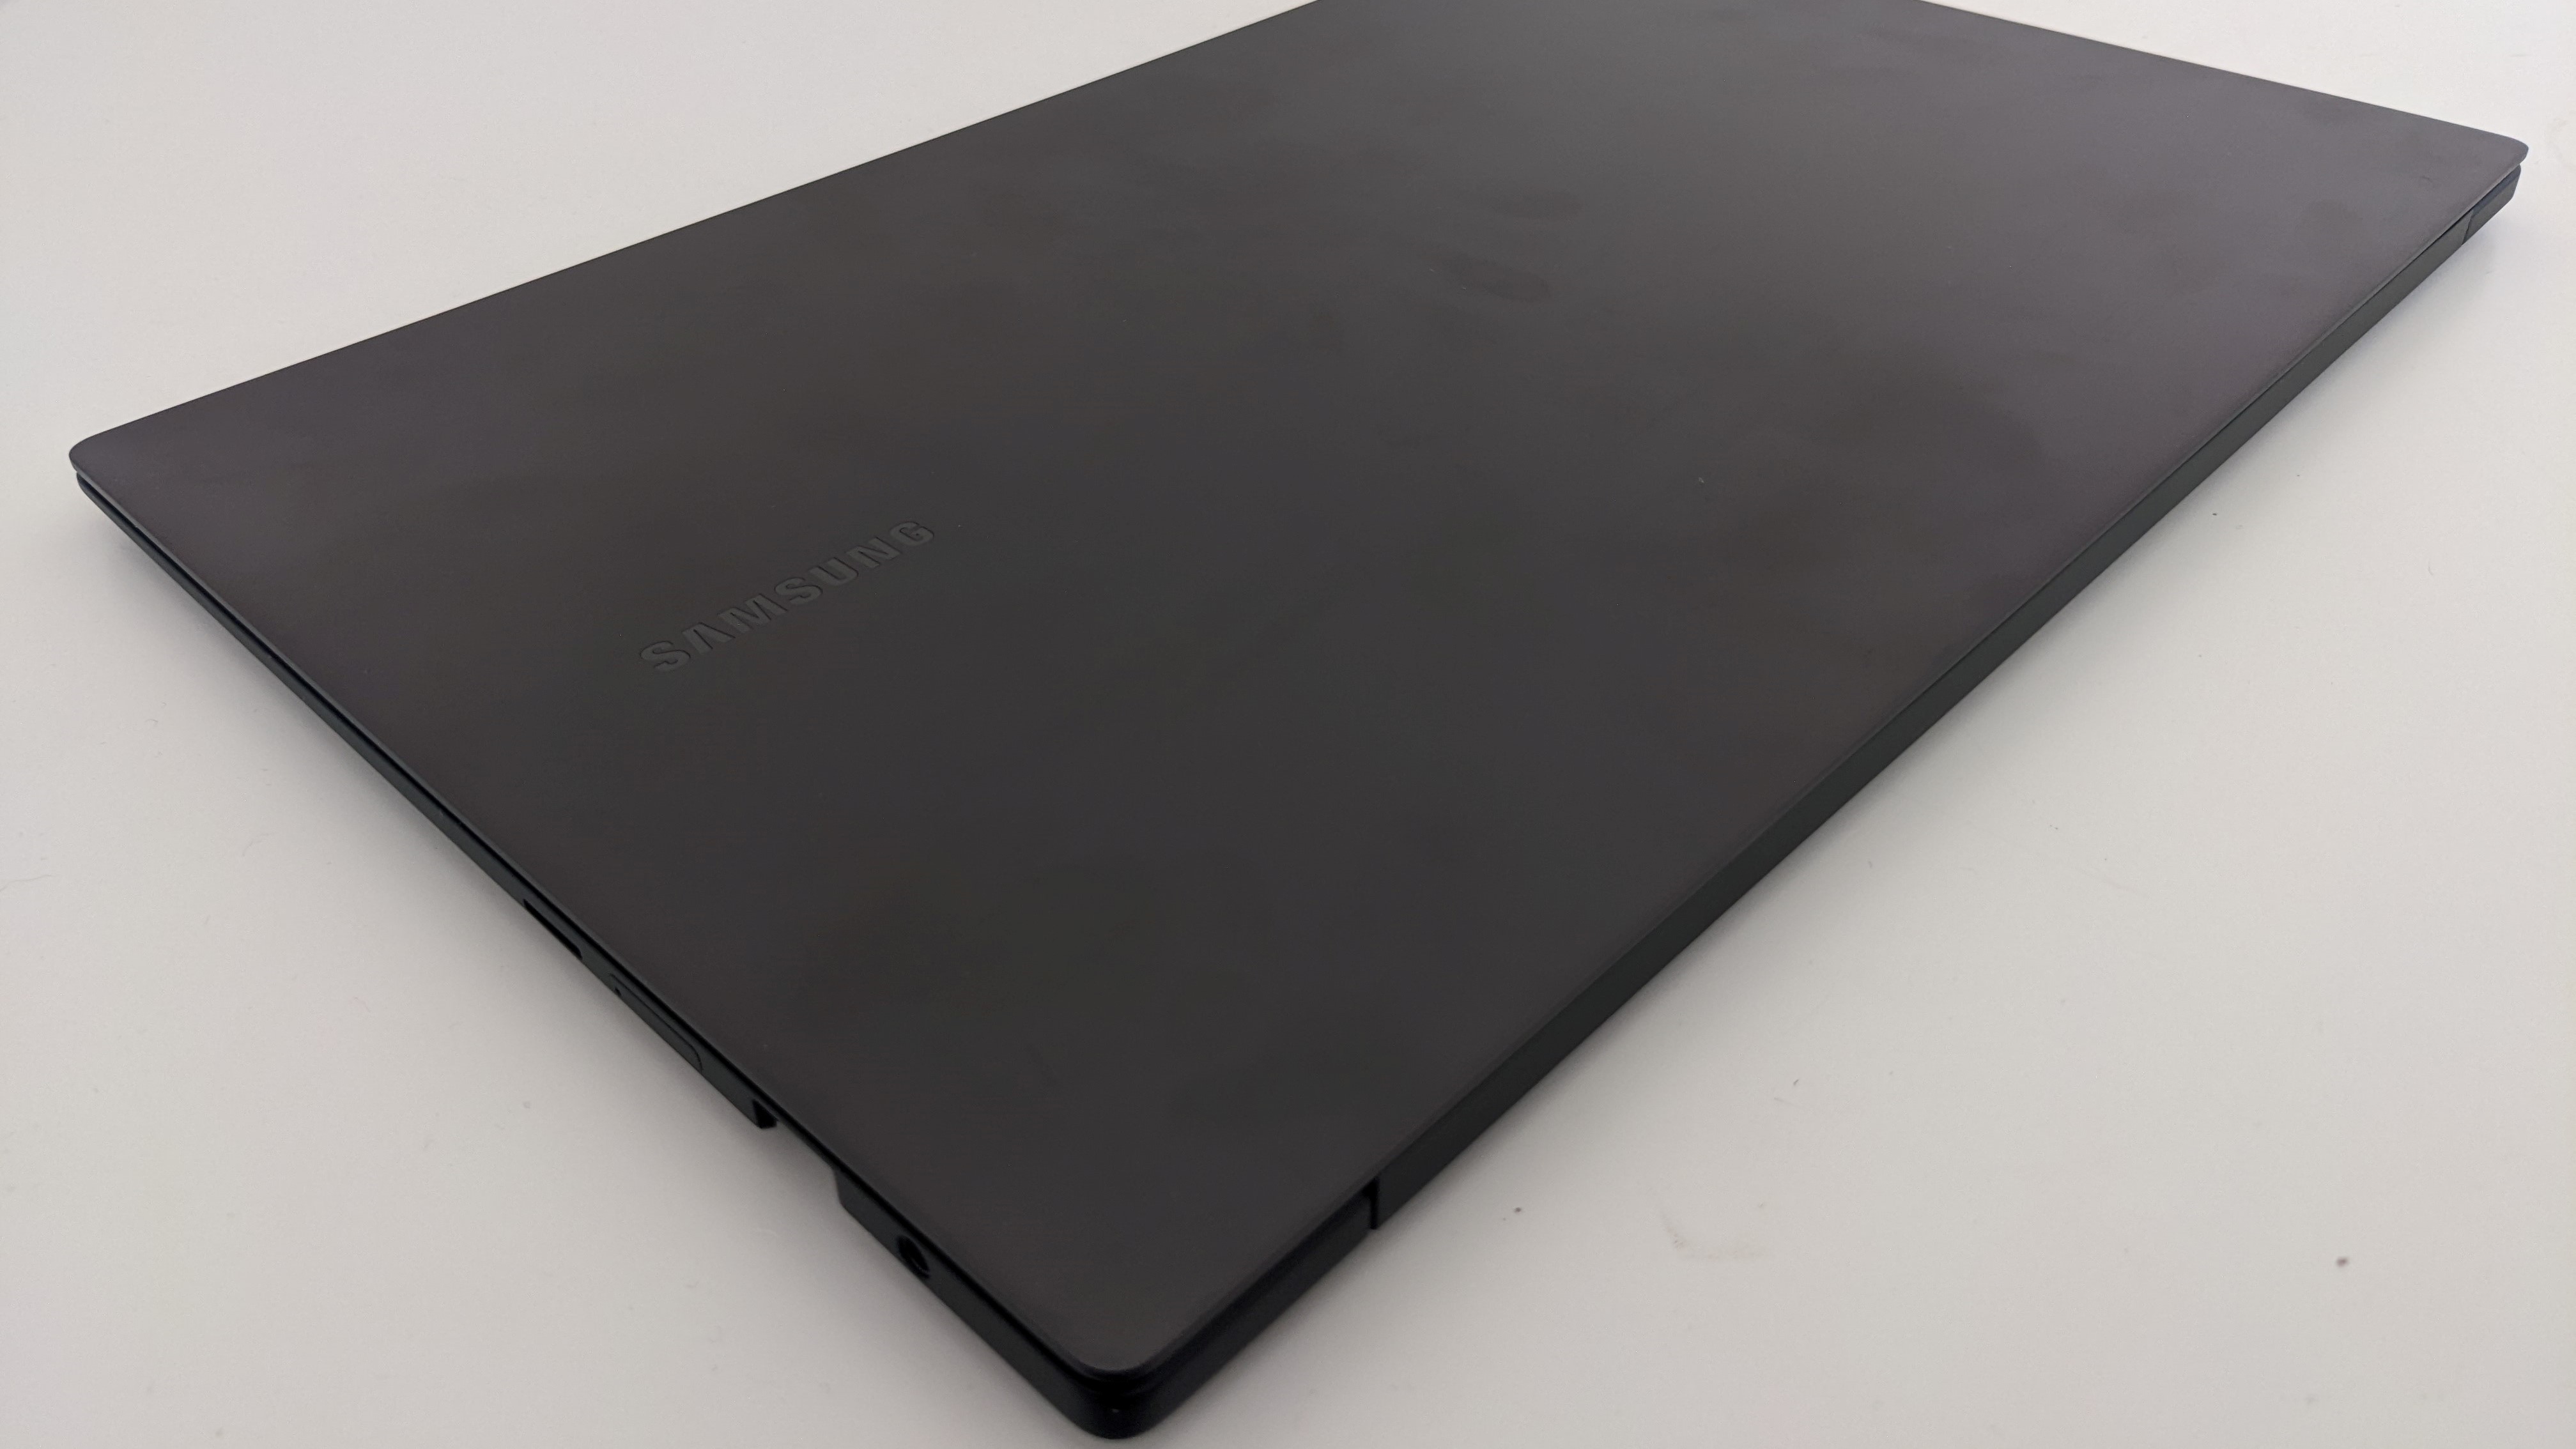 Samsung Galaxy Book2 Pro lid closed. Some smudged fingerprints are visible.